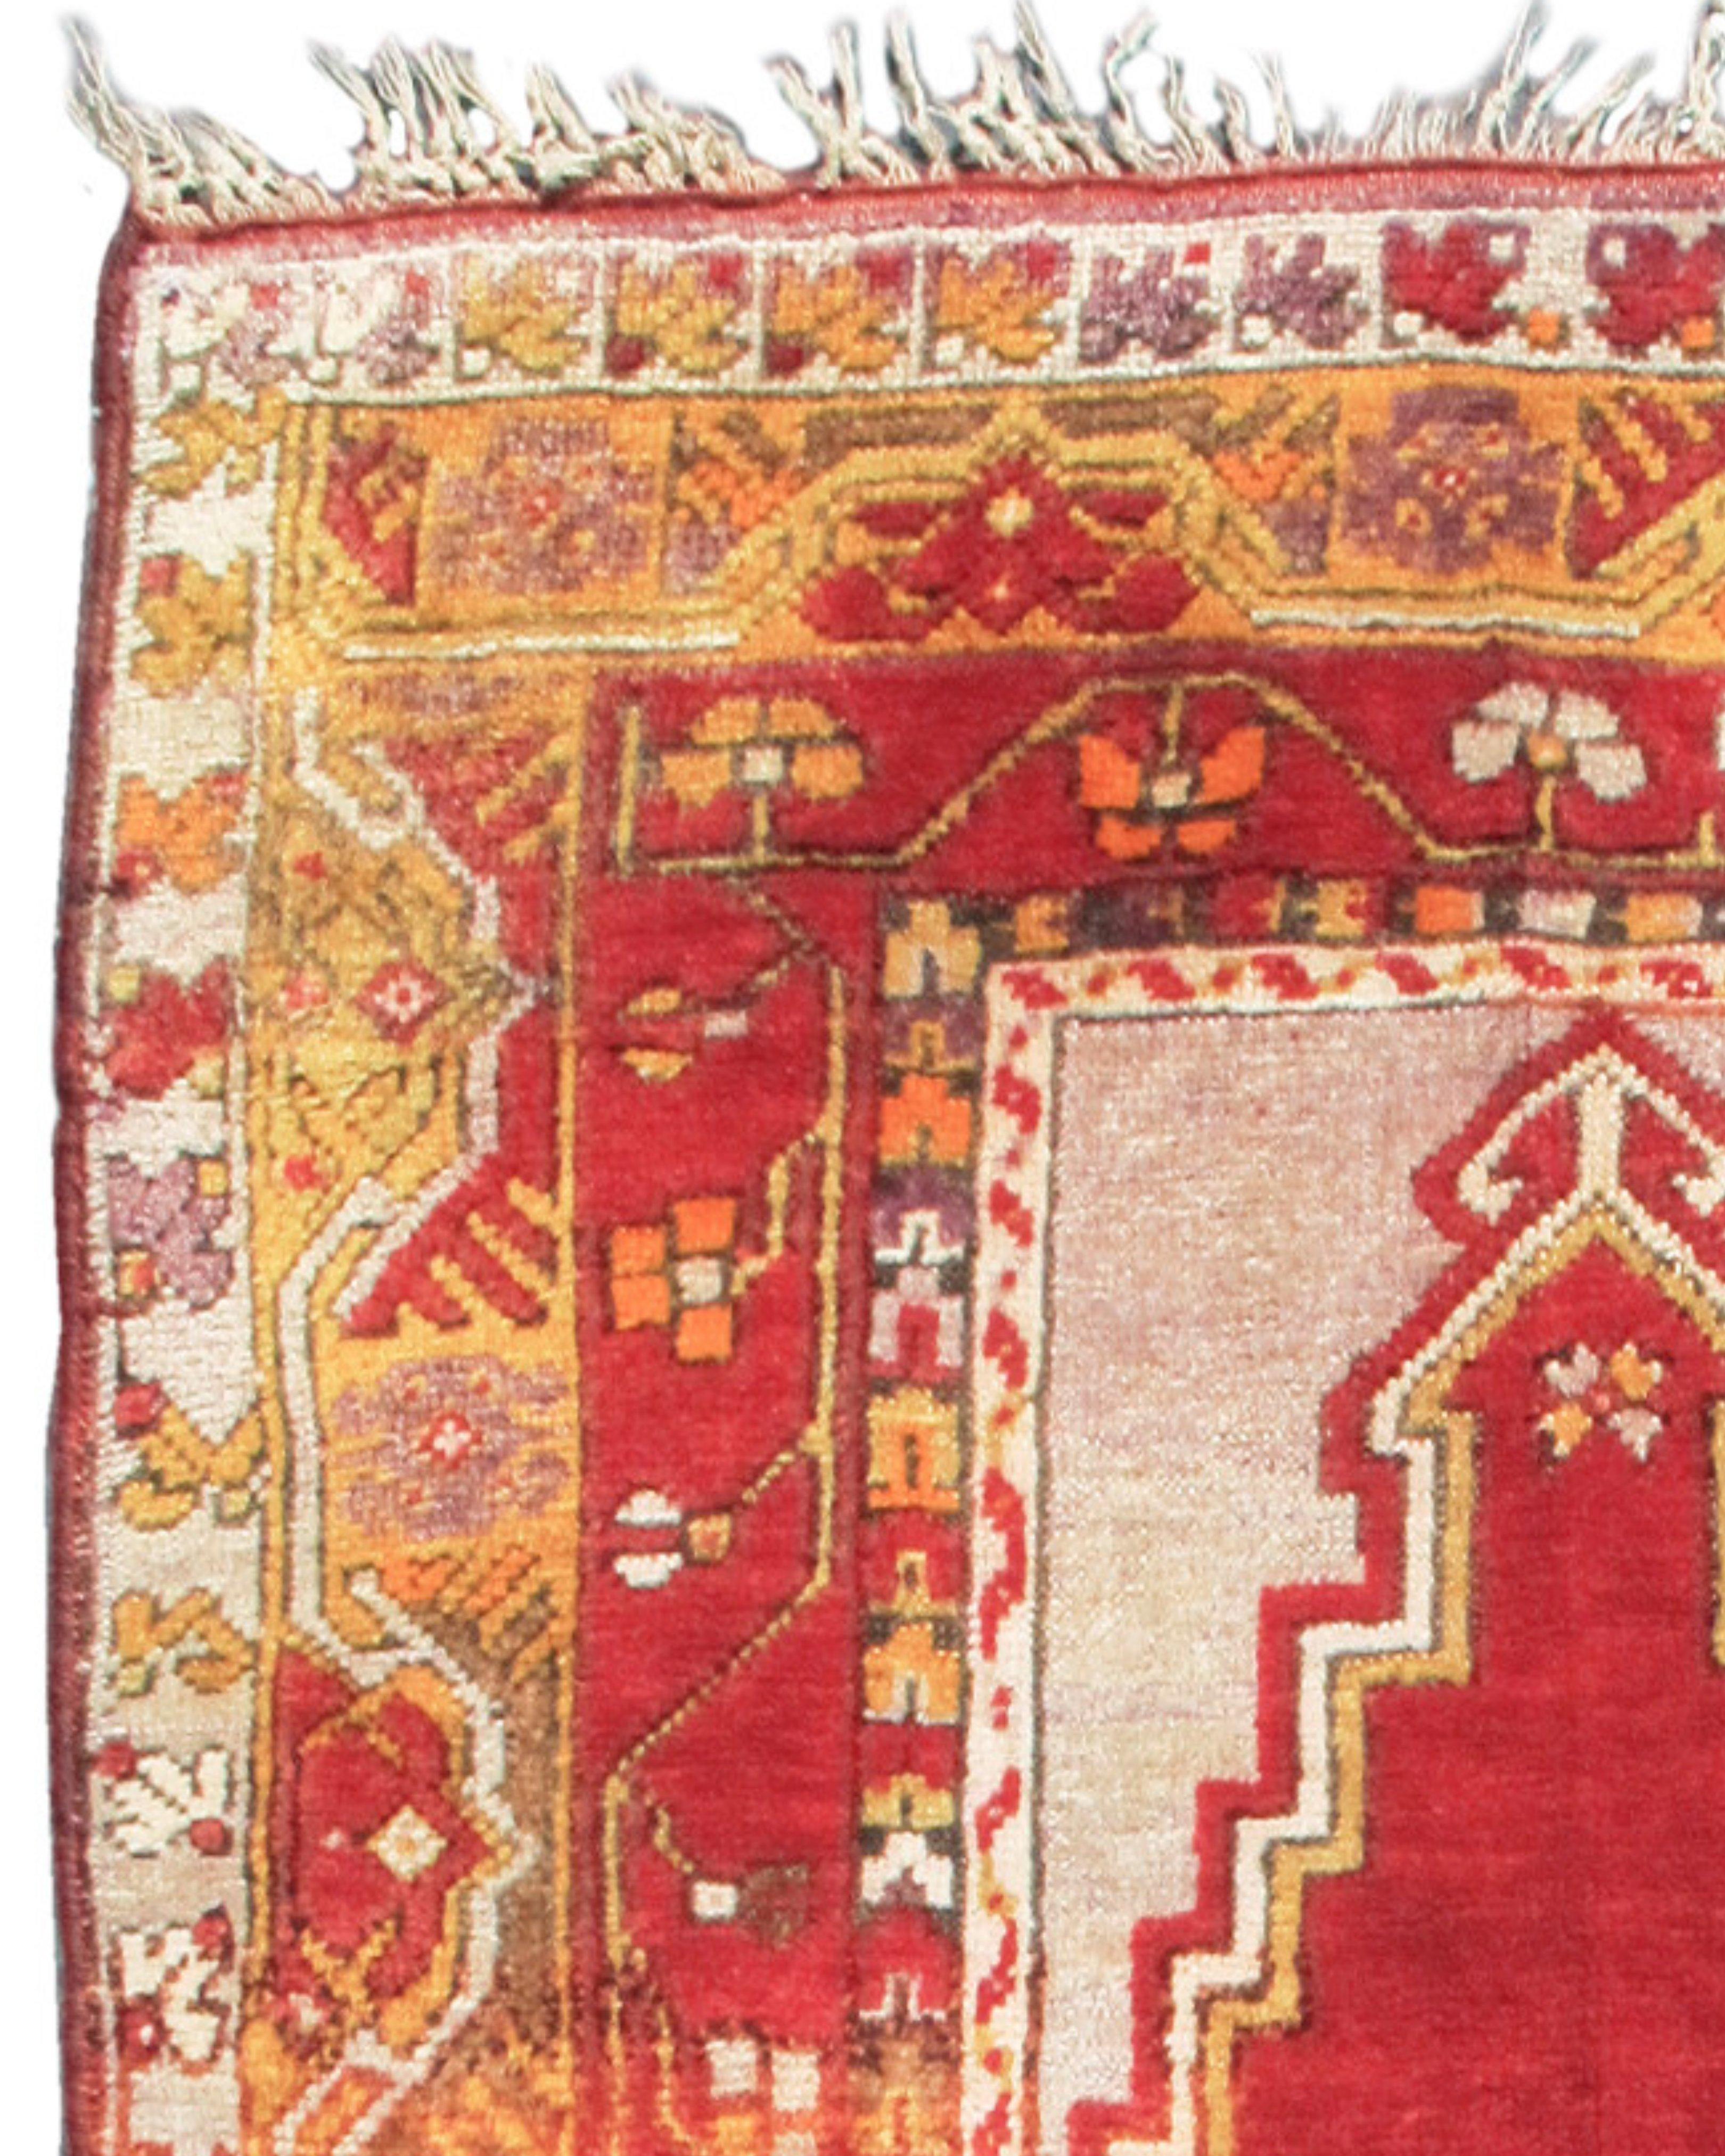 Hand-Knotted Turkish Prayer Rug, c. 1900 For Sale